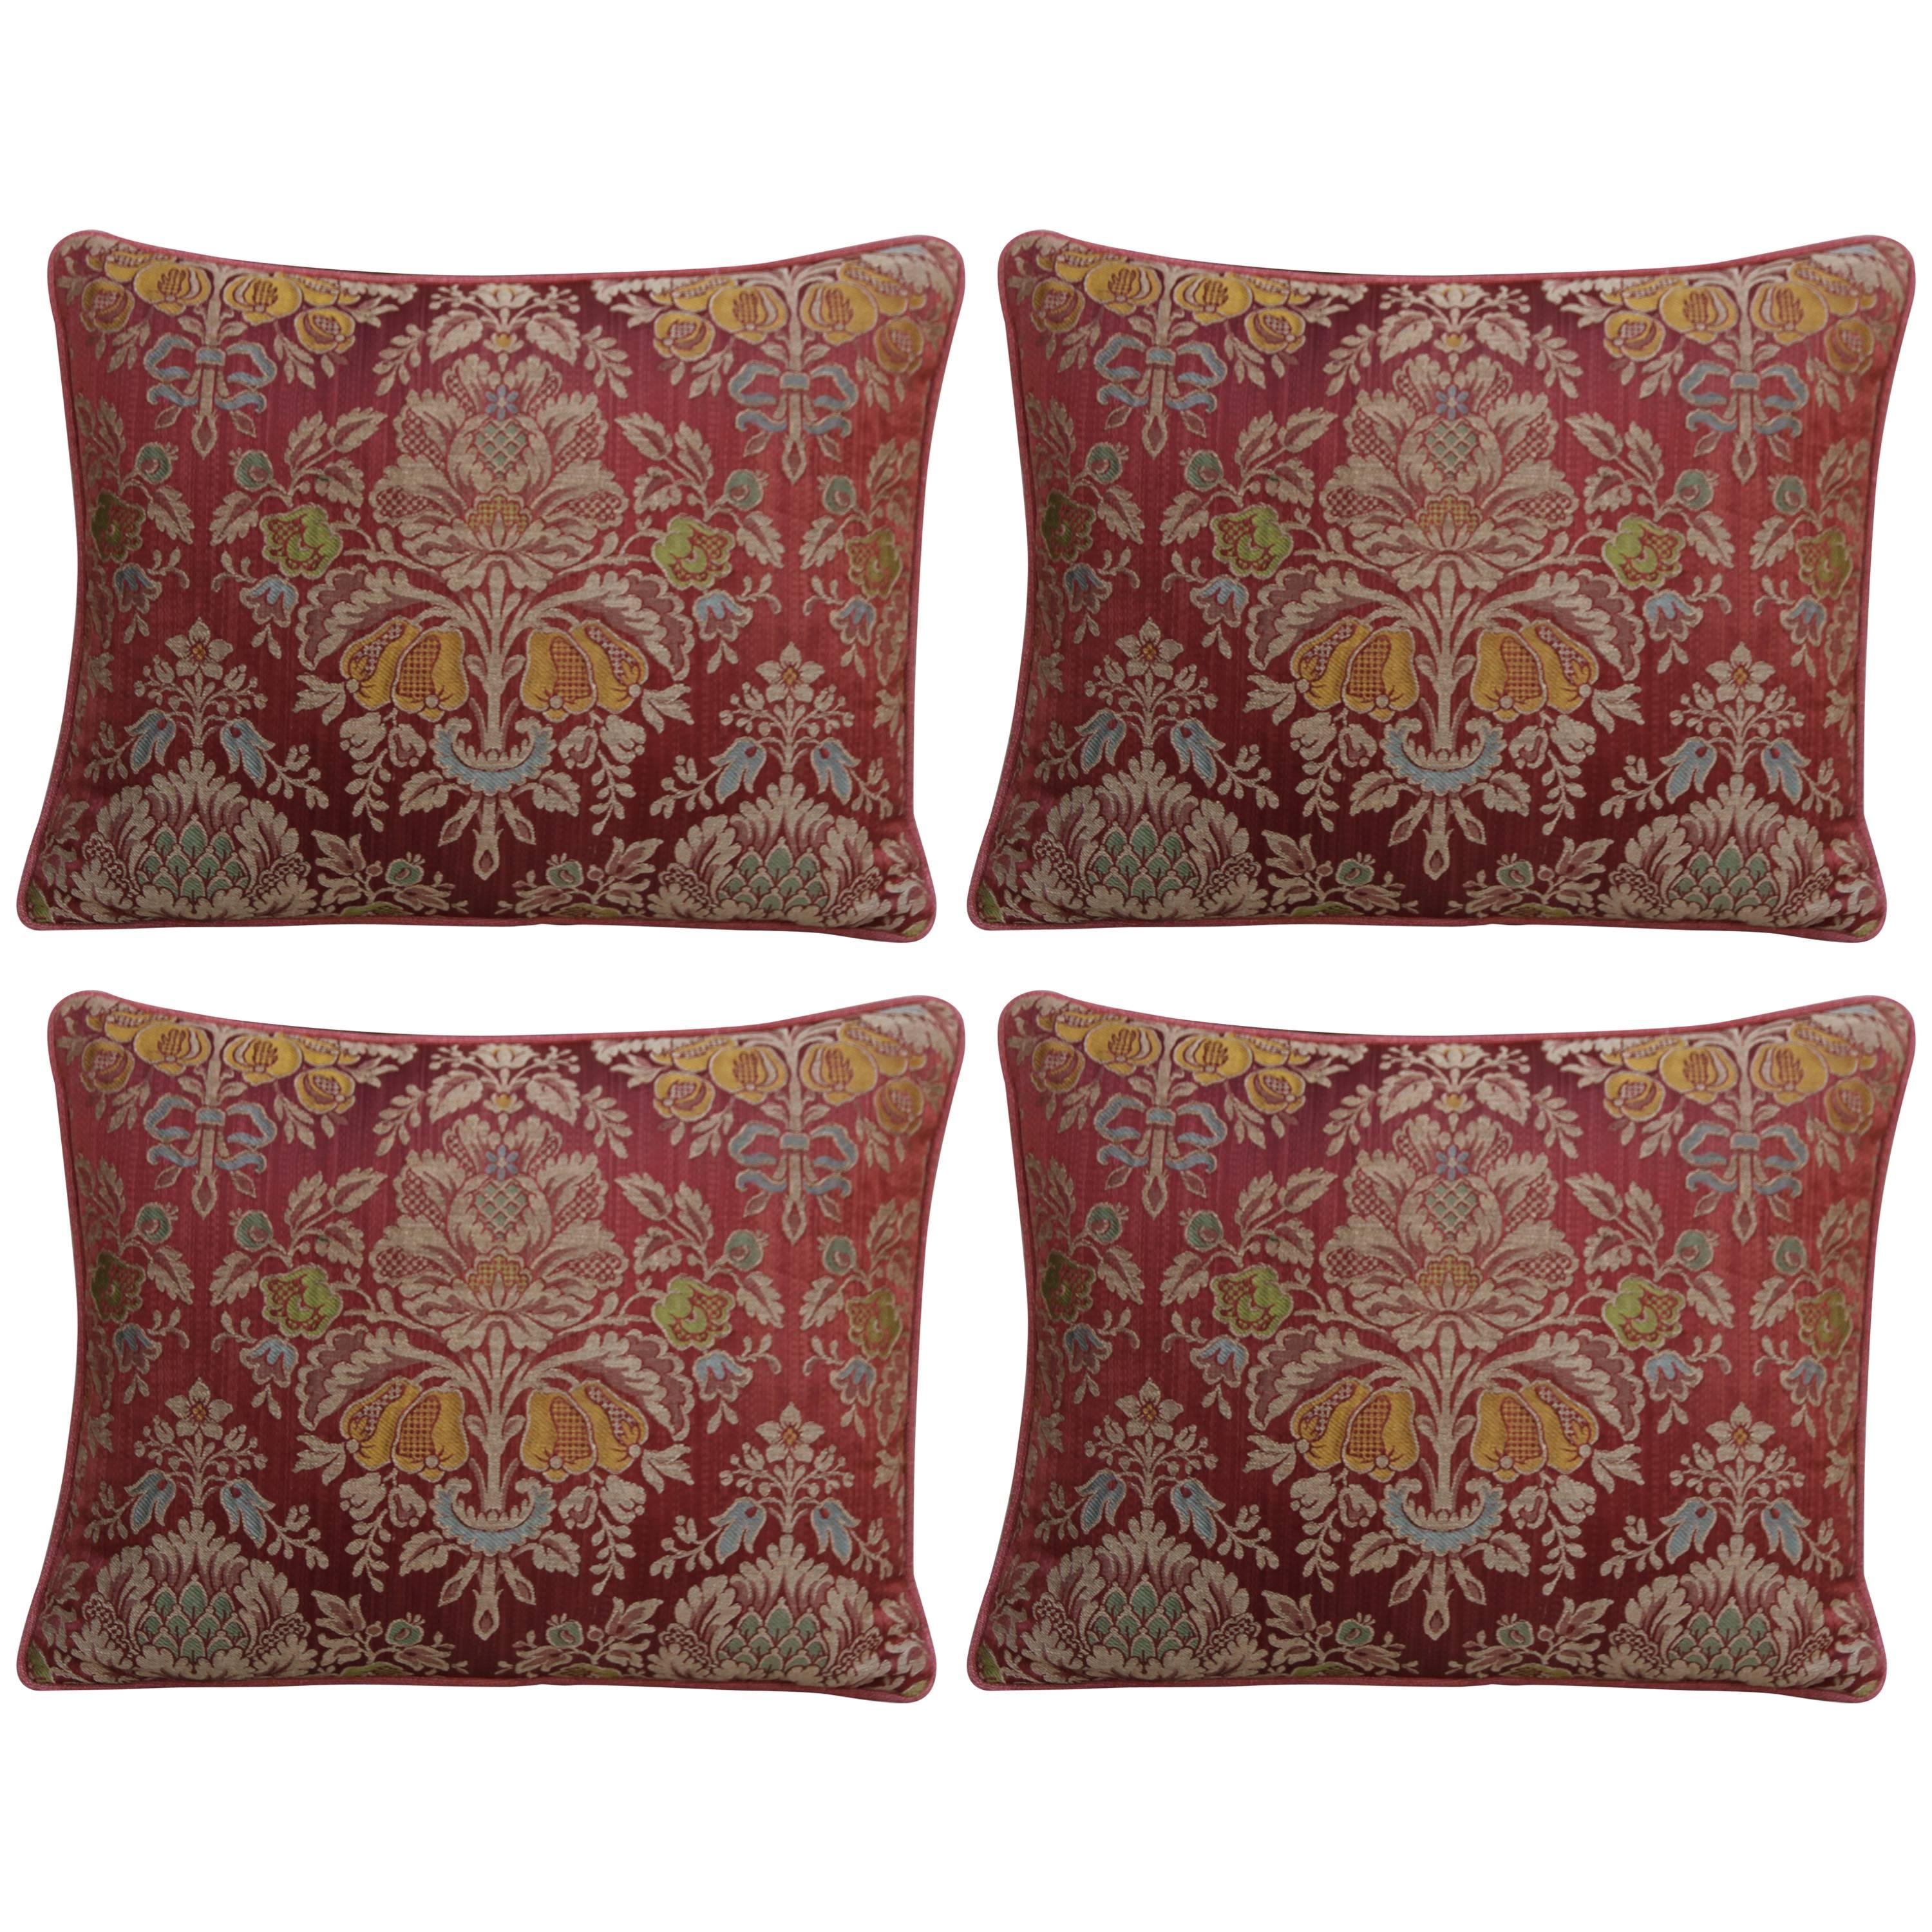 Pair of Antique Silk Damask Pillows with Linen Backs